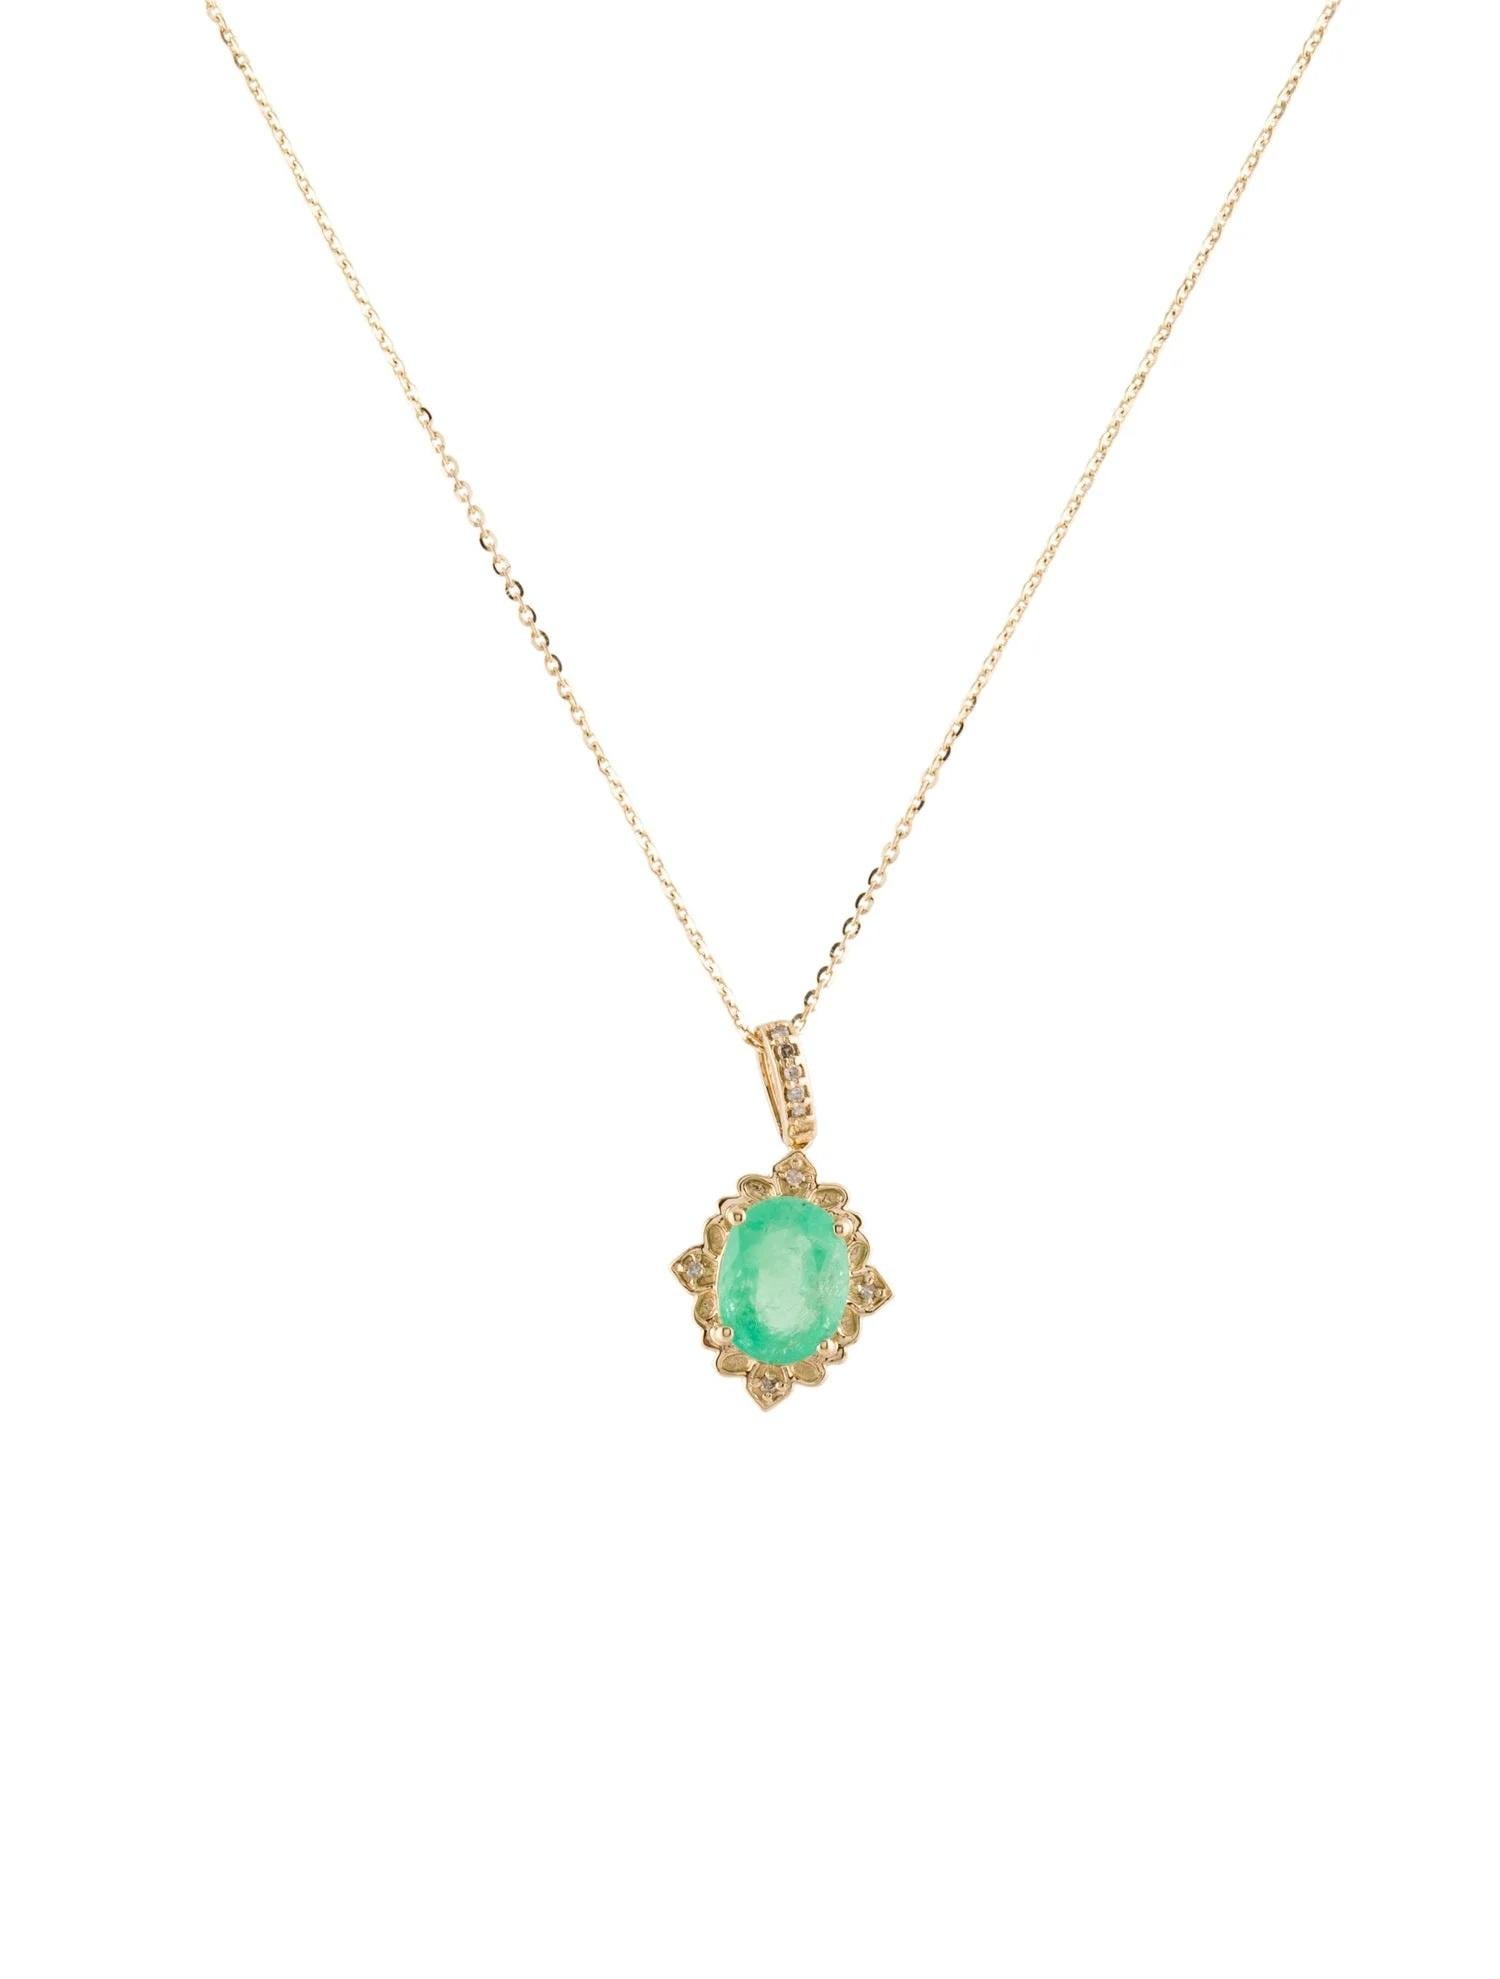 Emerald Cut 14K Emerald & Diamond Pendant Necklace  Yellow Gold  Oval Faceted Emerald For Sale